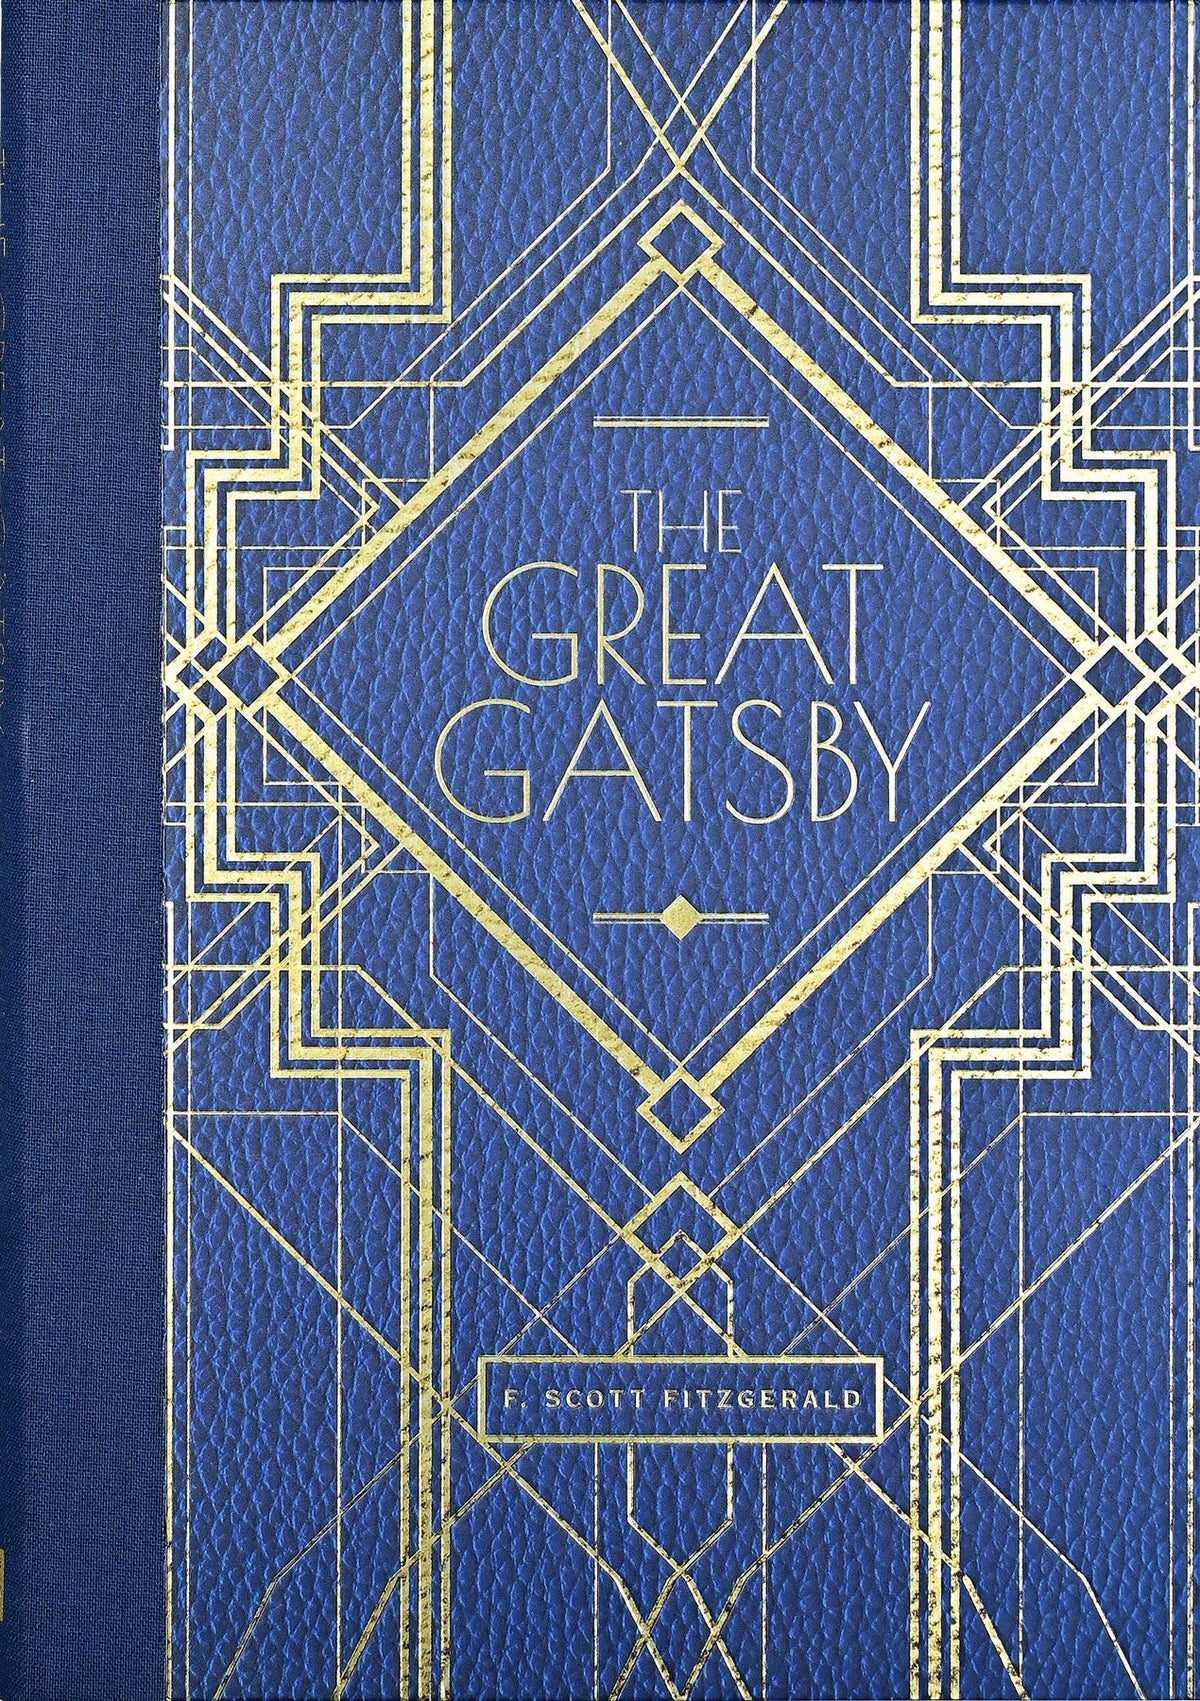 The Great Gatsby Masterpiece Library Edition